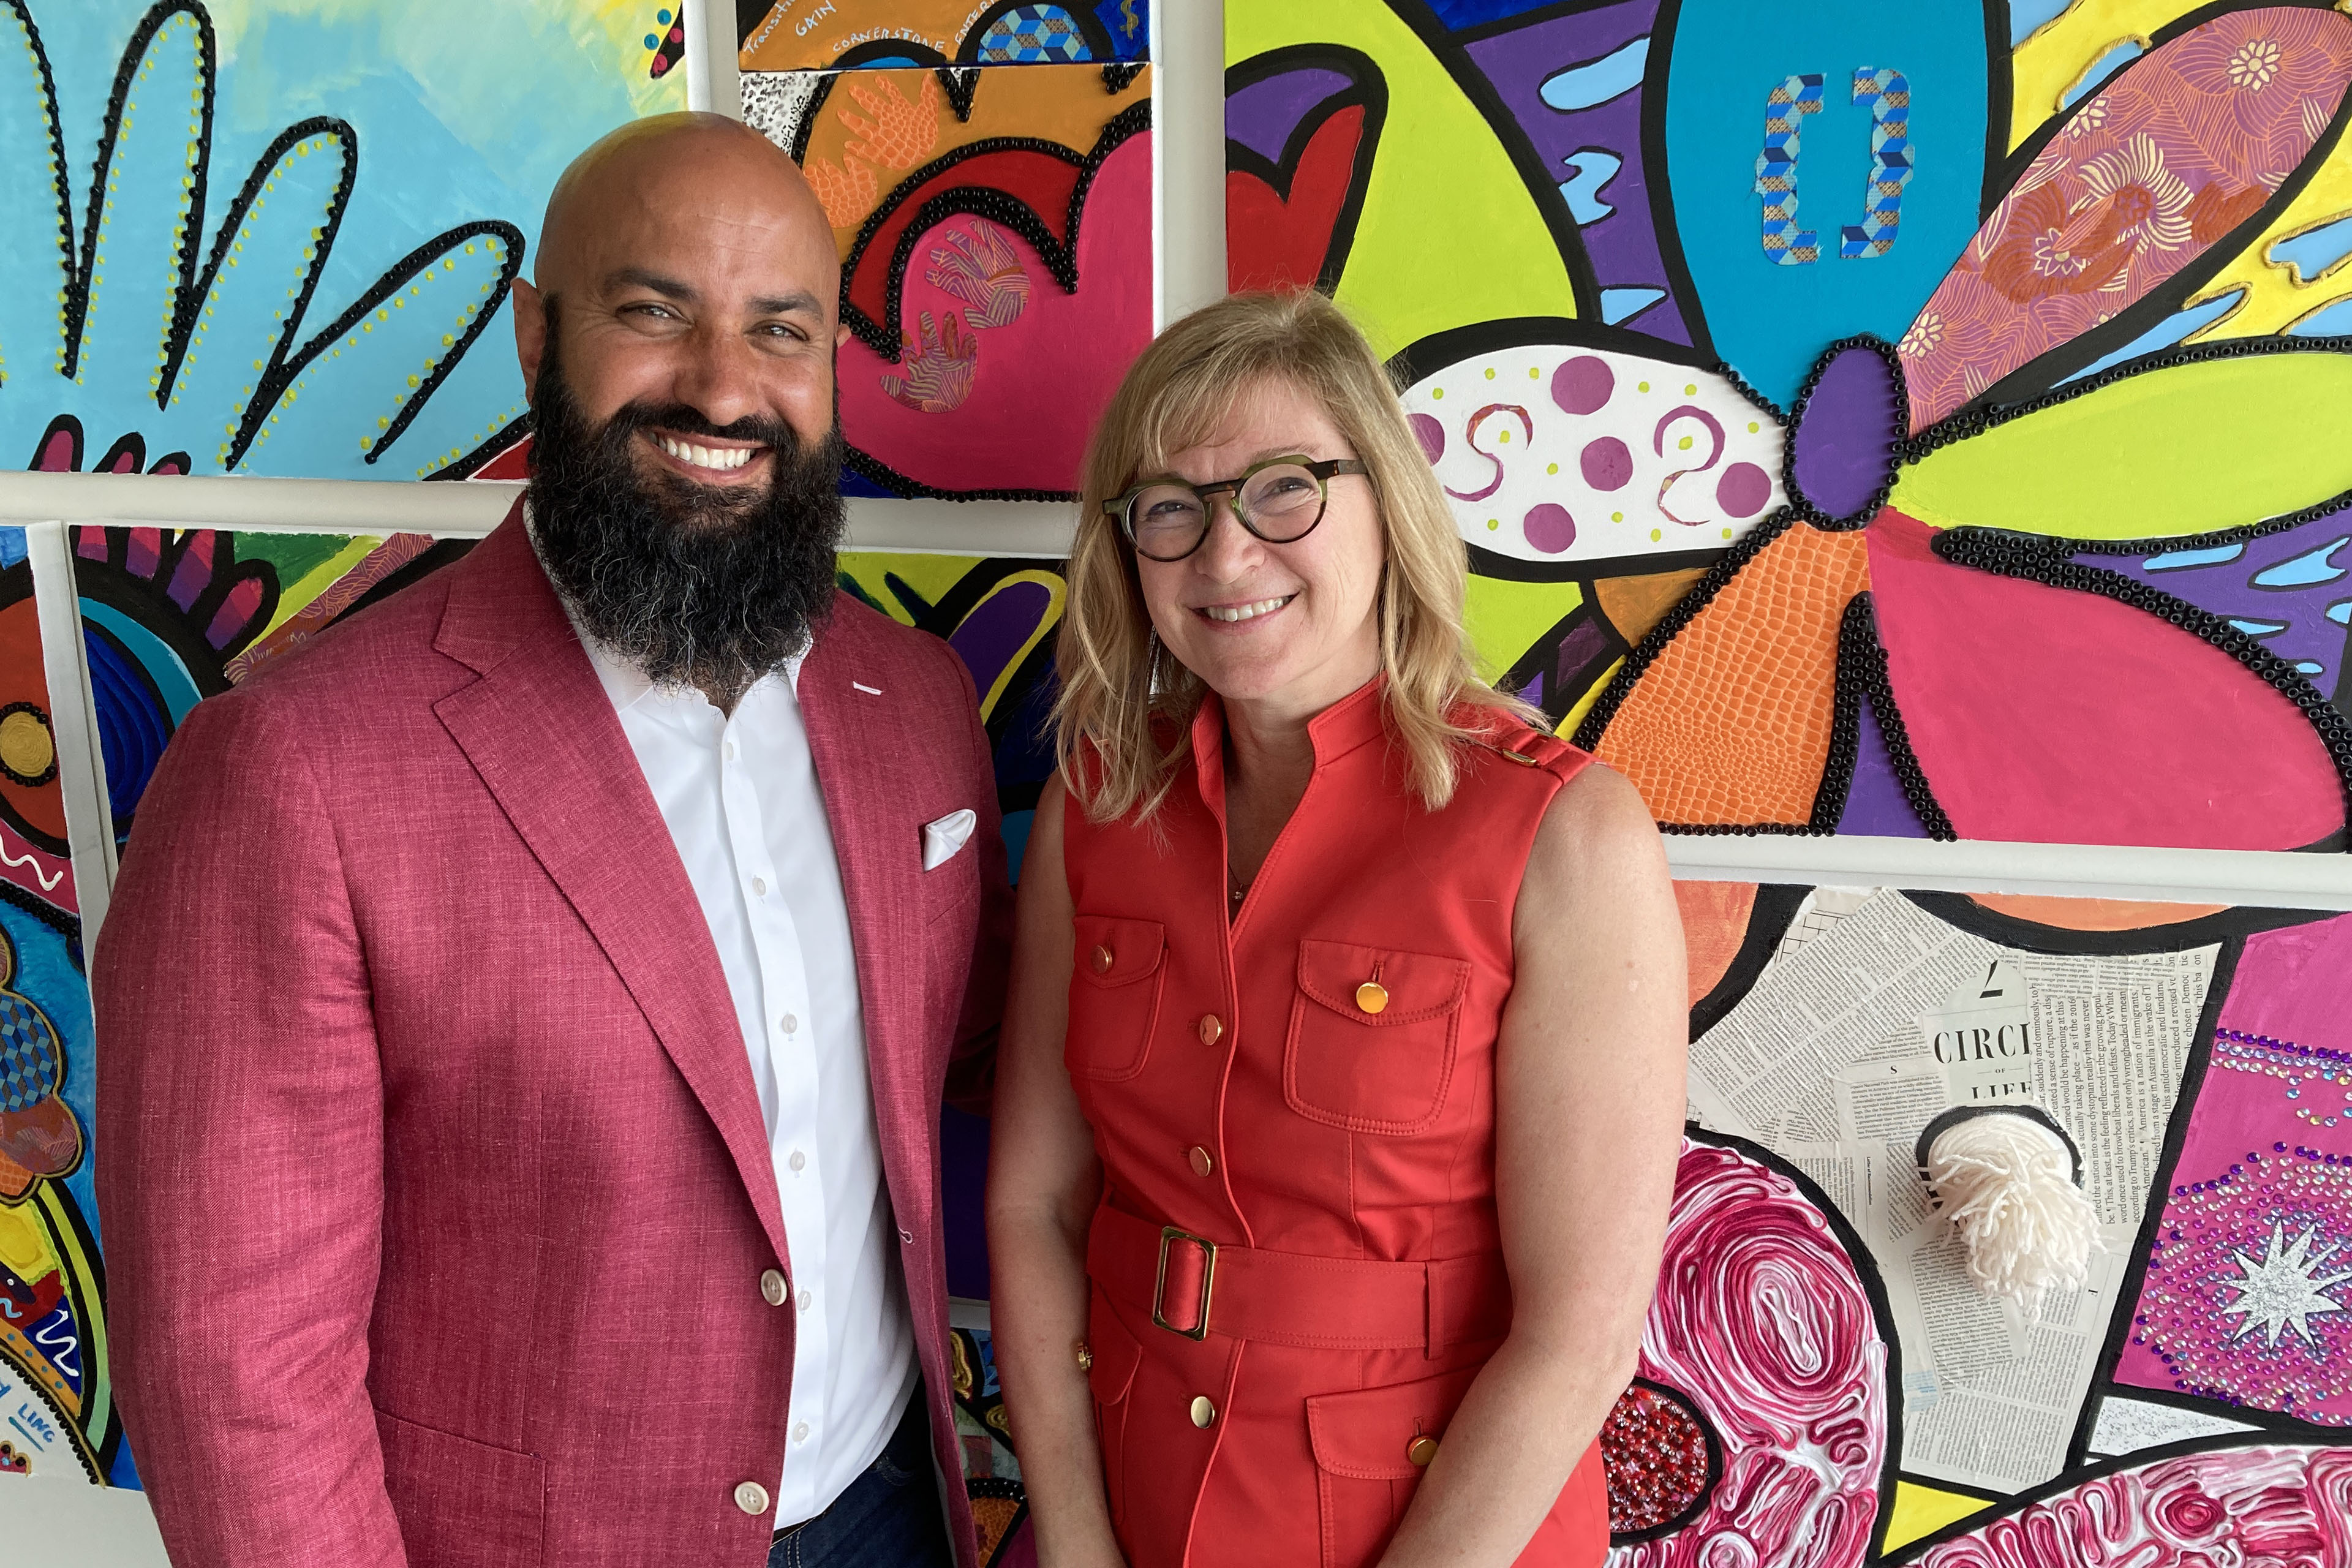 A man with a beard wearing a red blazer and white shirt stands next to a woman with glasses wearing a red dress. They stand in front of a brightly colored wall